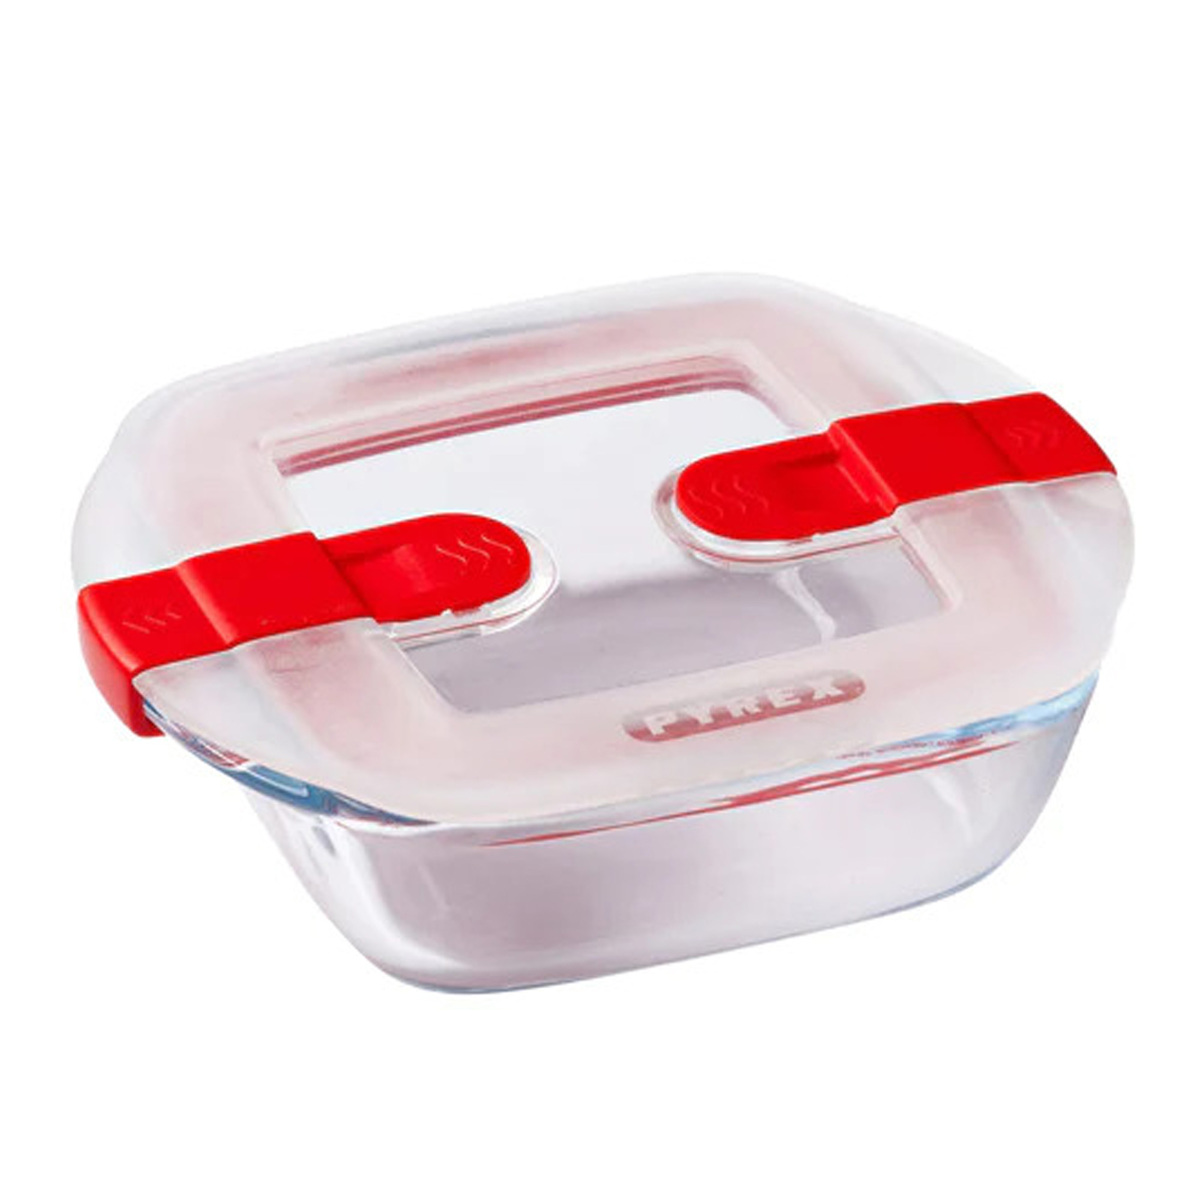 Pyrex Square Dish with Plastic Lid, 211P